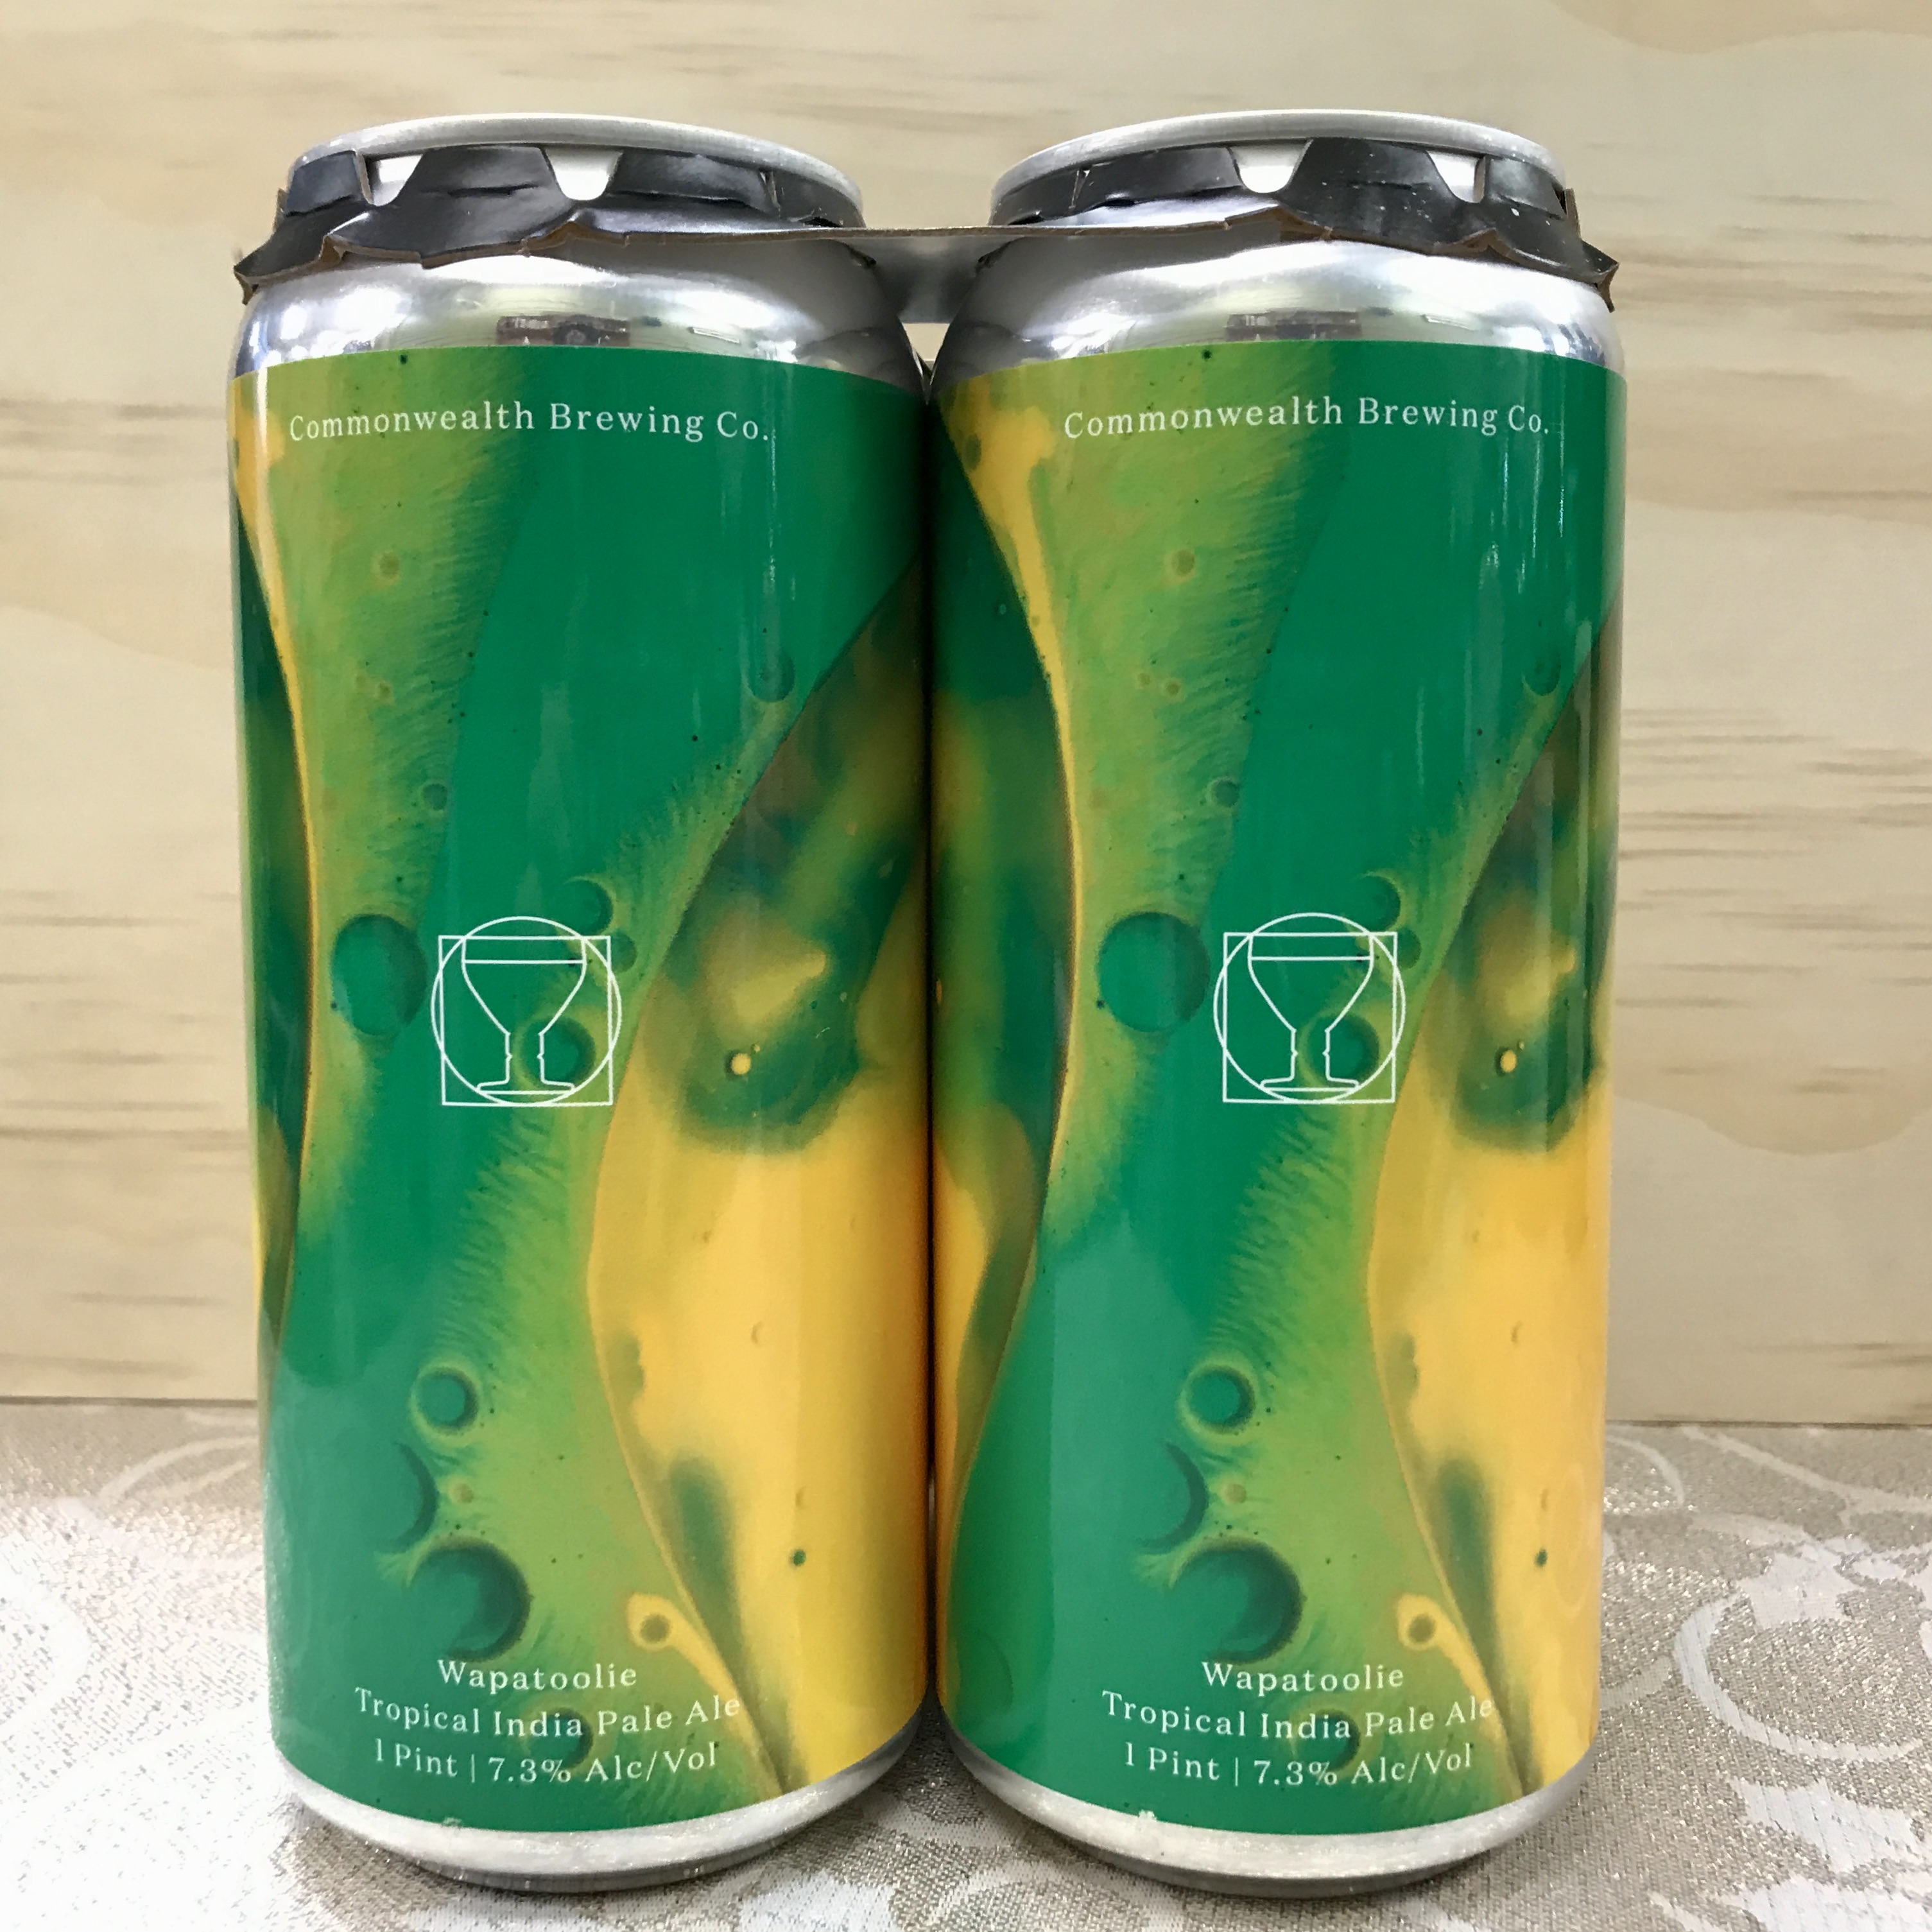 Commonwealth Brewing Co. Wapatoolie IPA 4 x 1pint cans